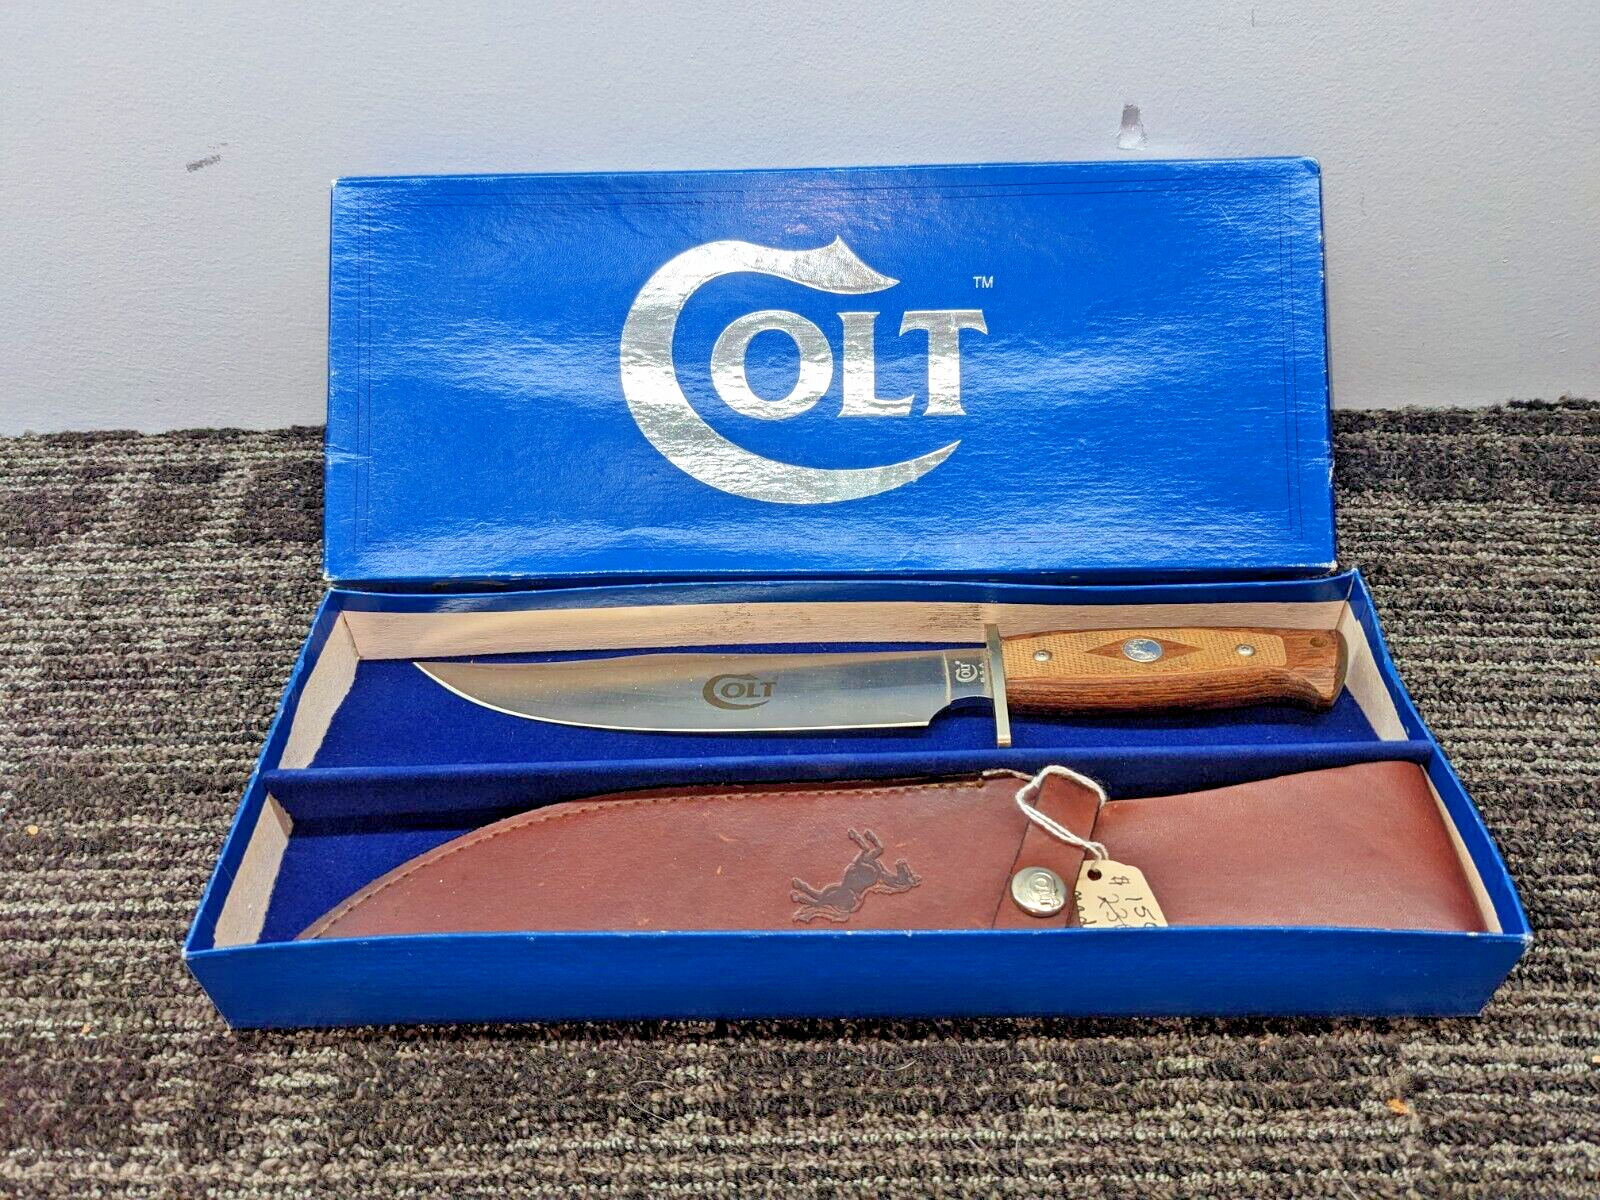 Colt 1993 Limited Edition Bowie Knife CT-1 Made In The USA